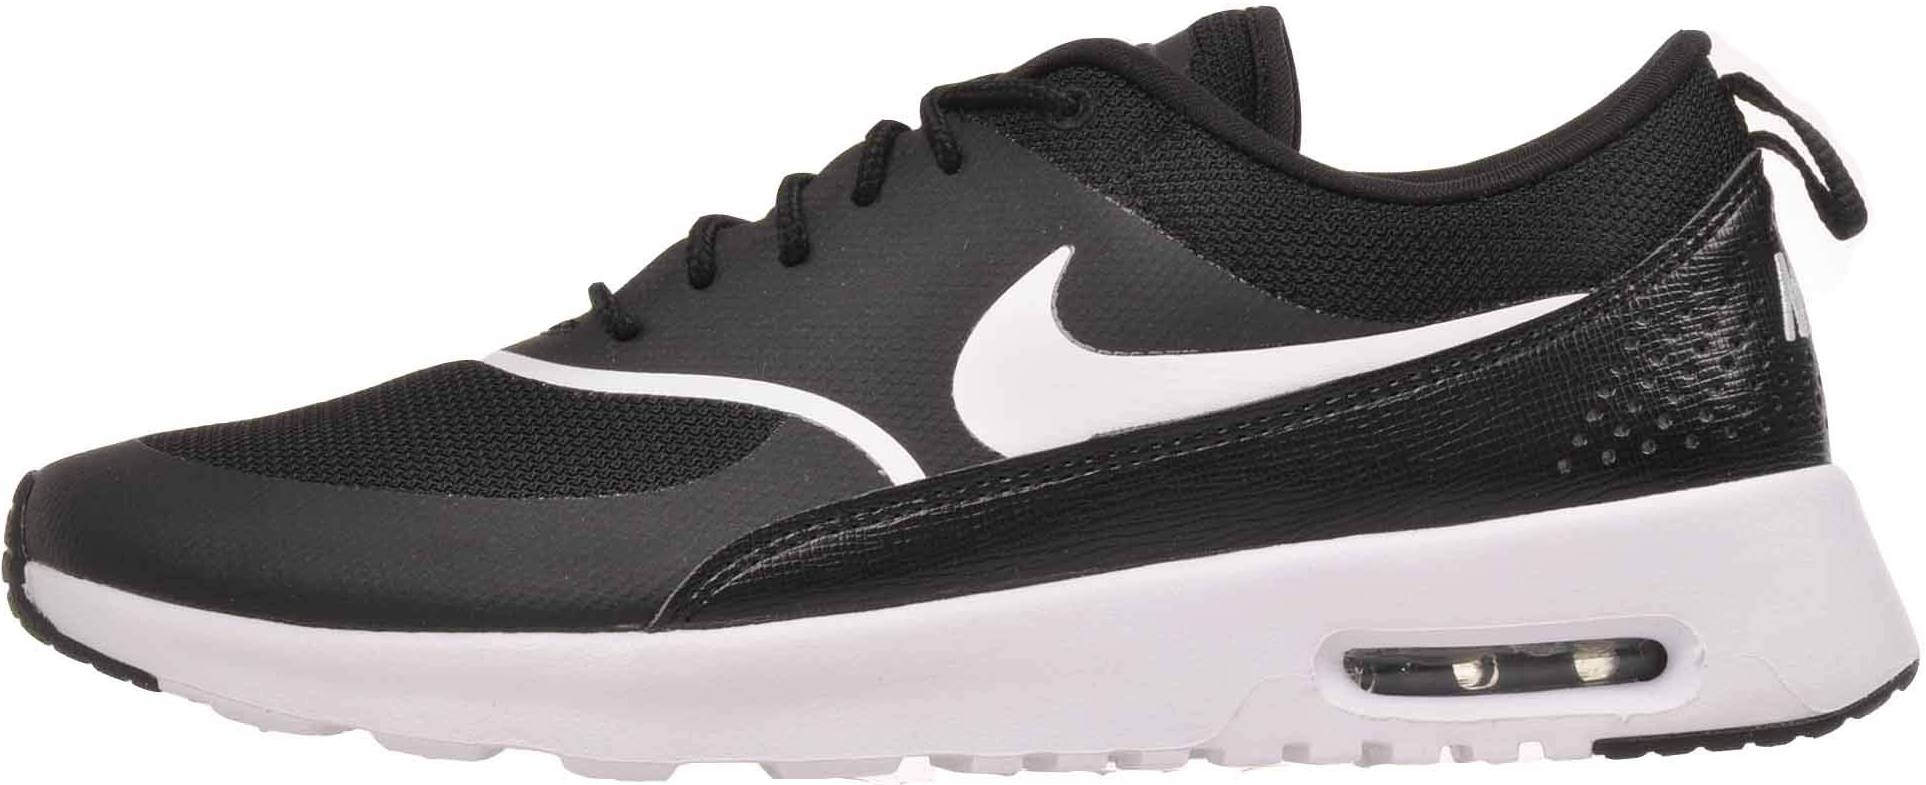 Cataract ore dominate Nike Air Max Thea sneakers in 20+ colors (only $55) | RunRepeat